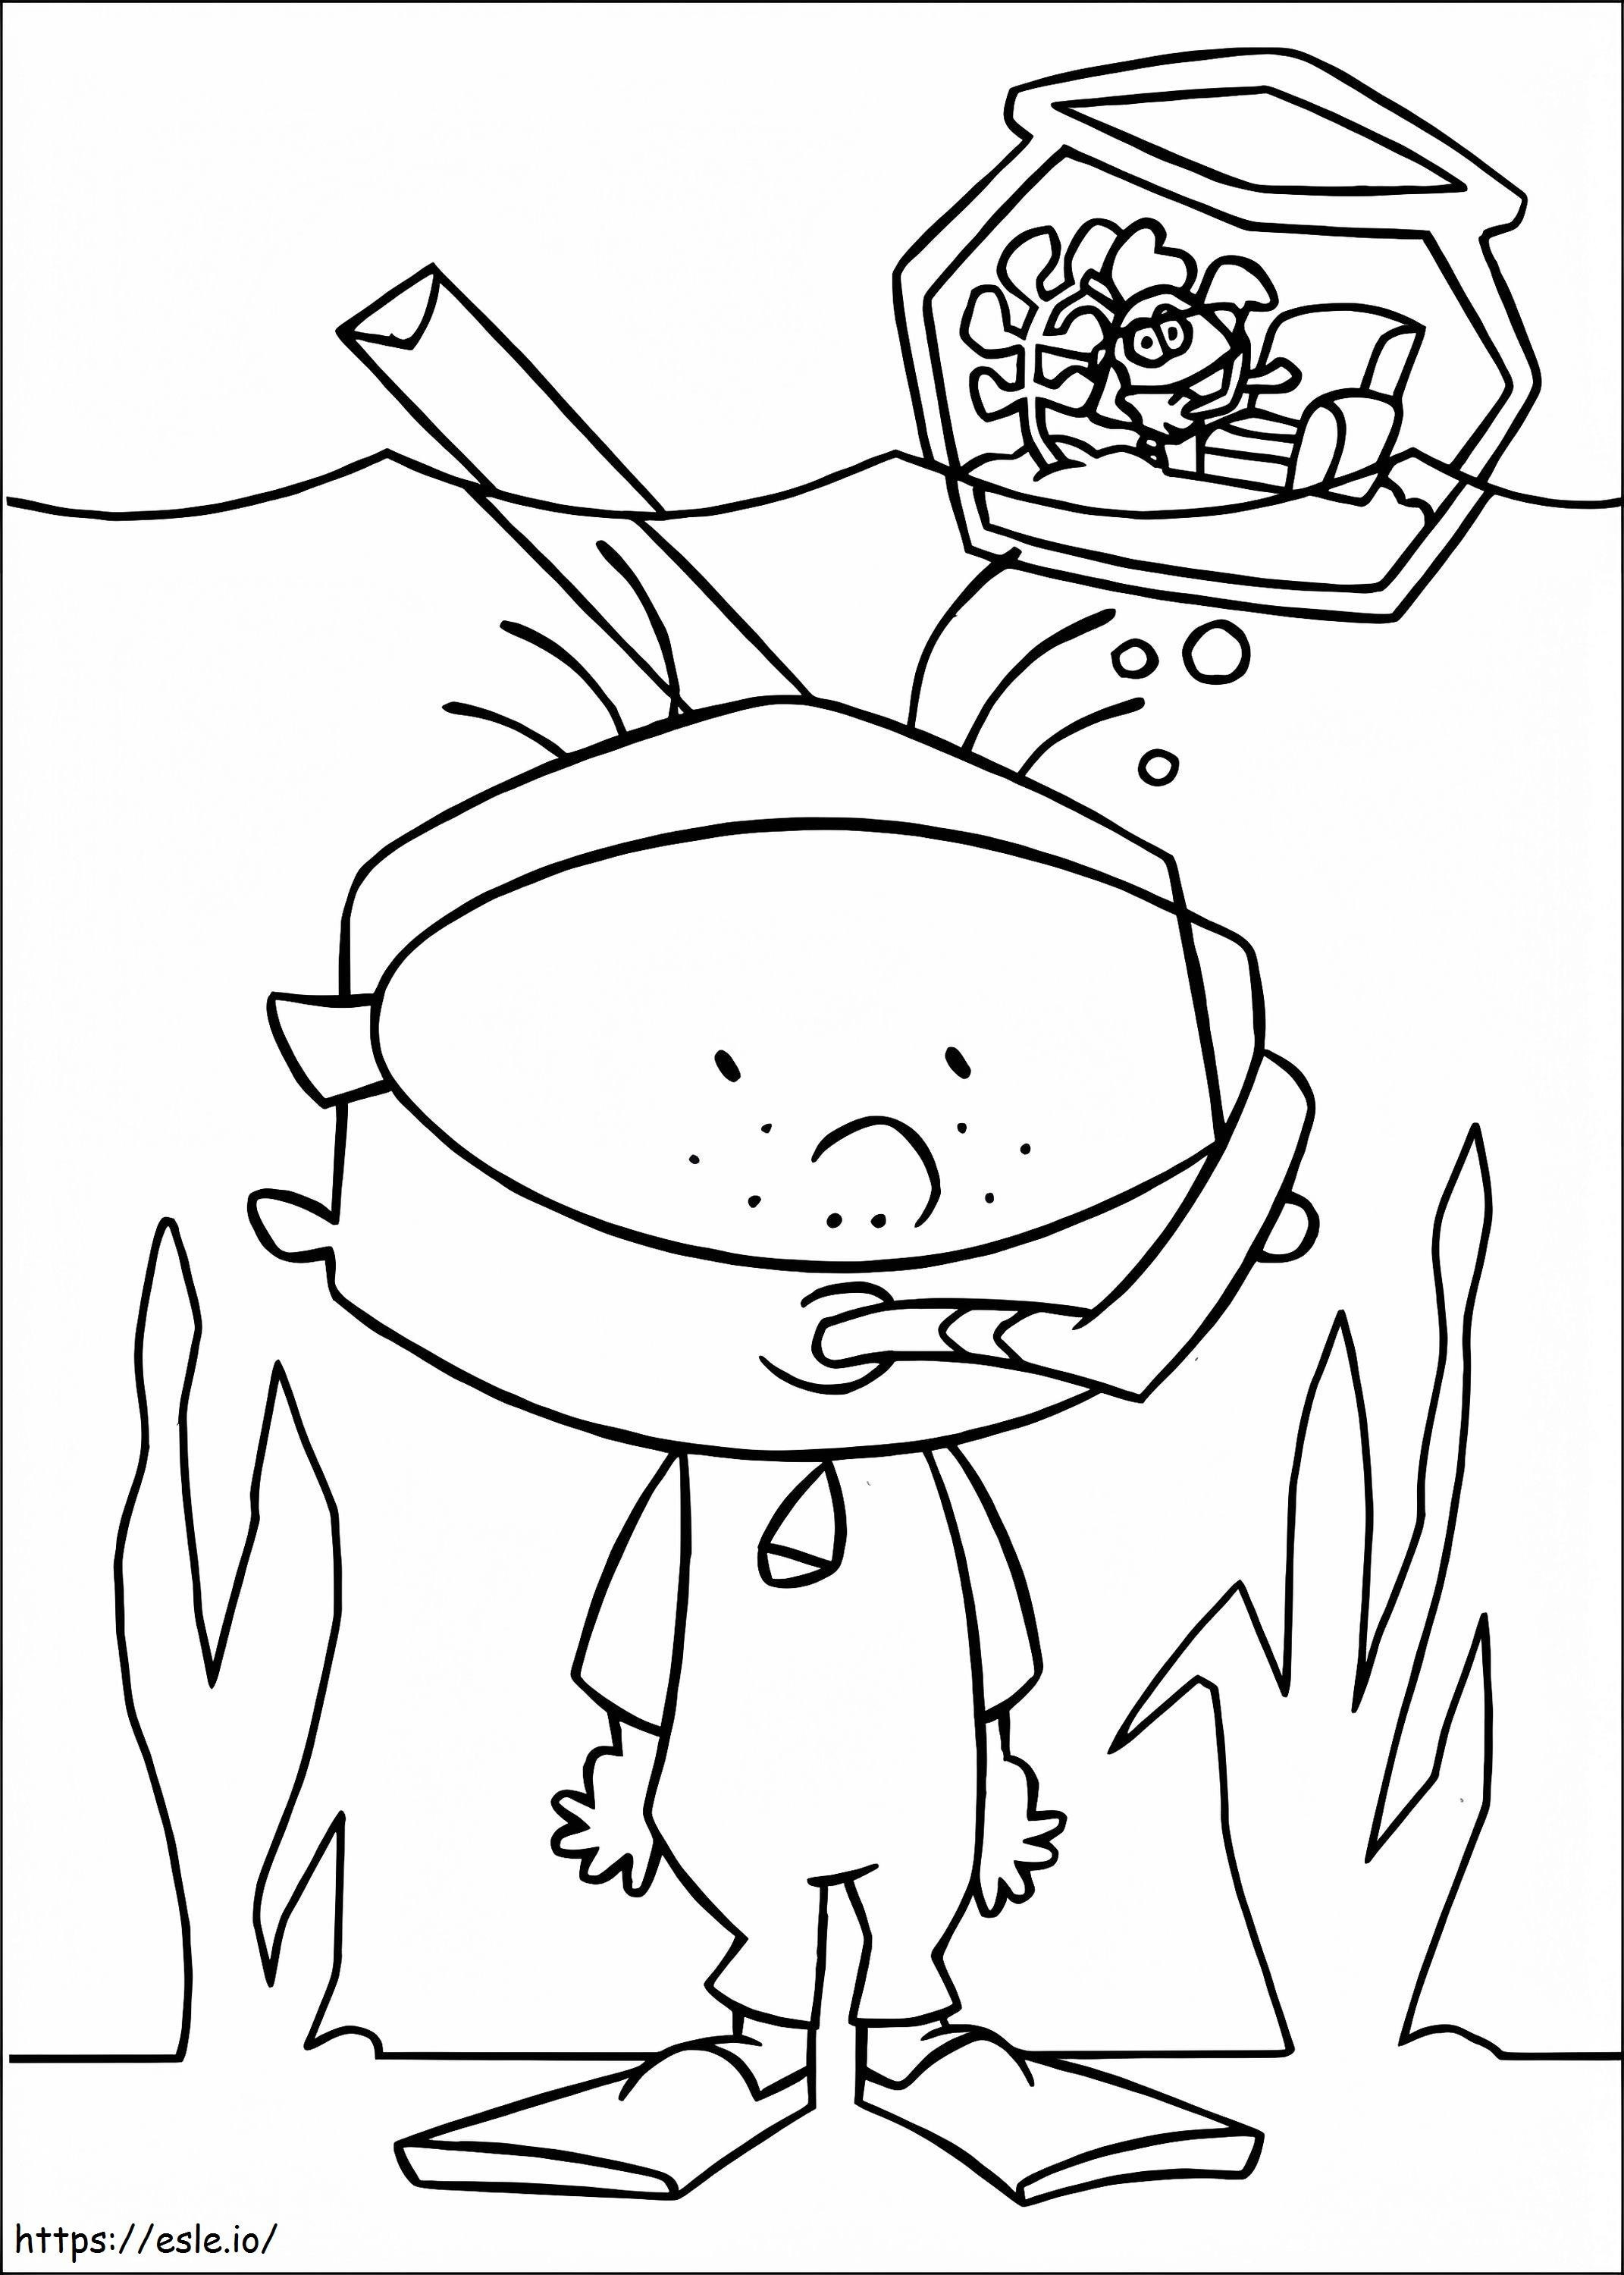 Stanley Under Water coloring page